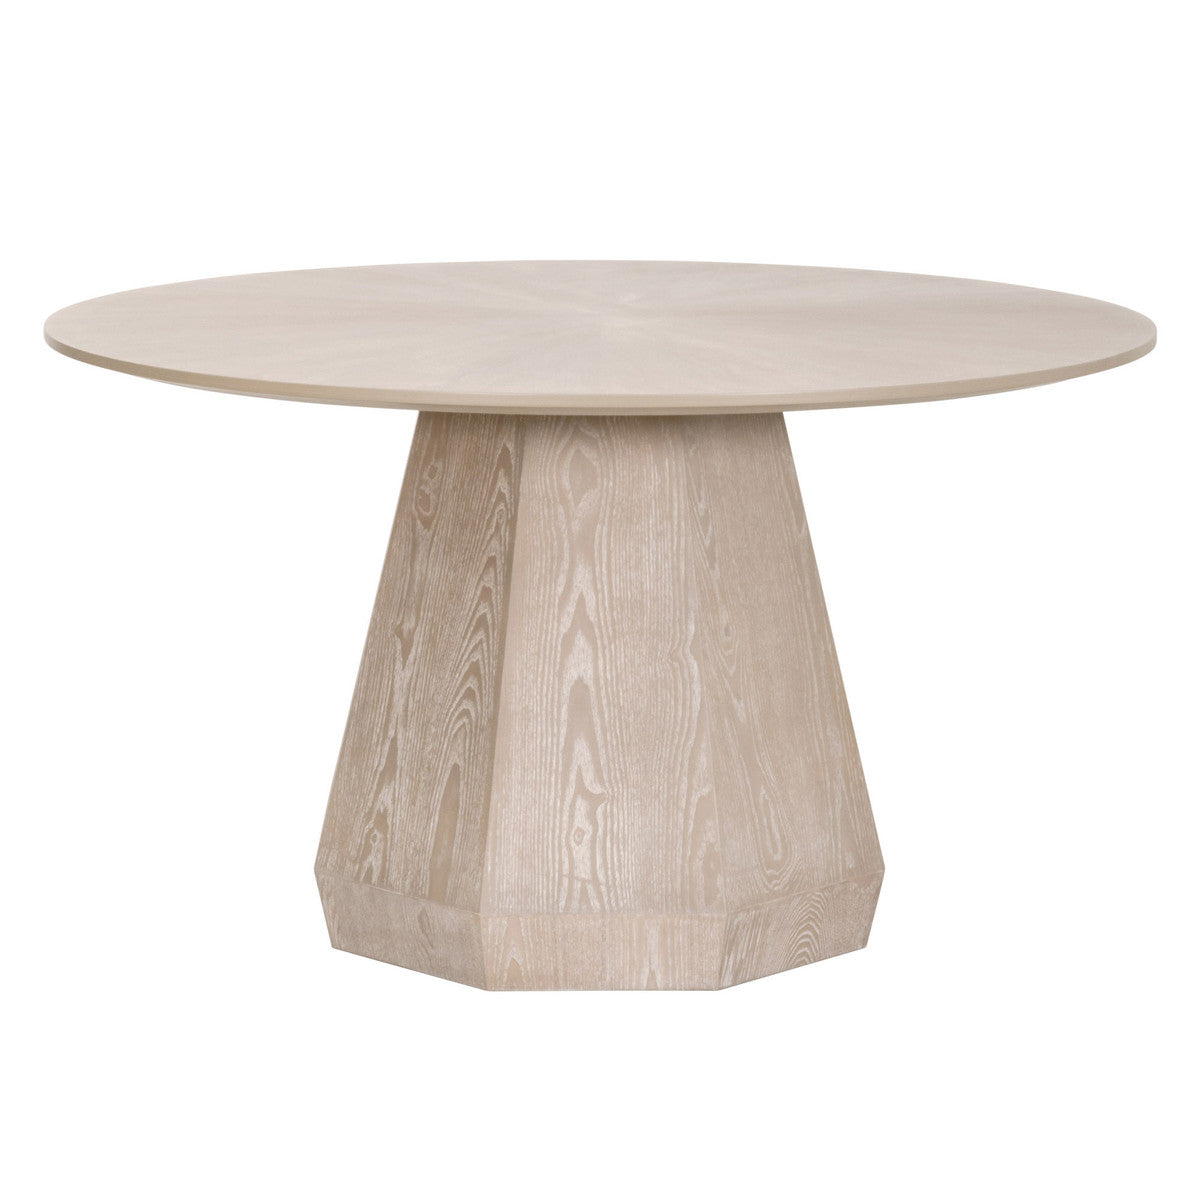 Sheridan 54" Round Dining Table